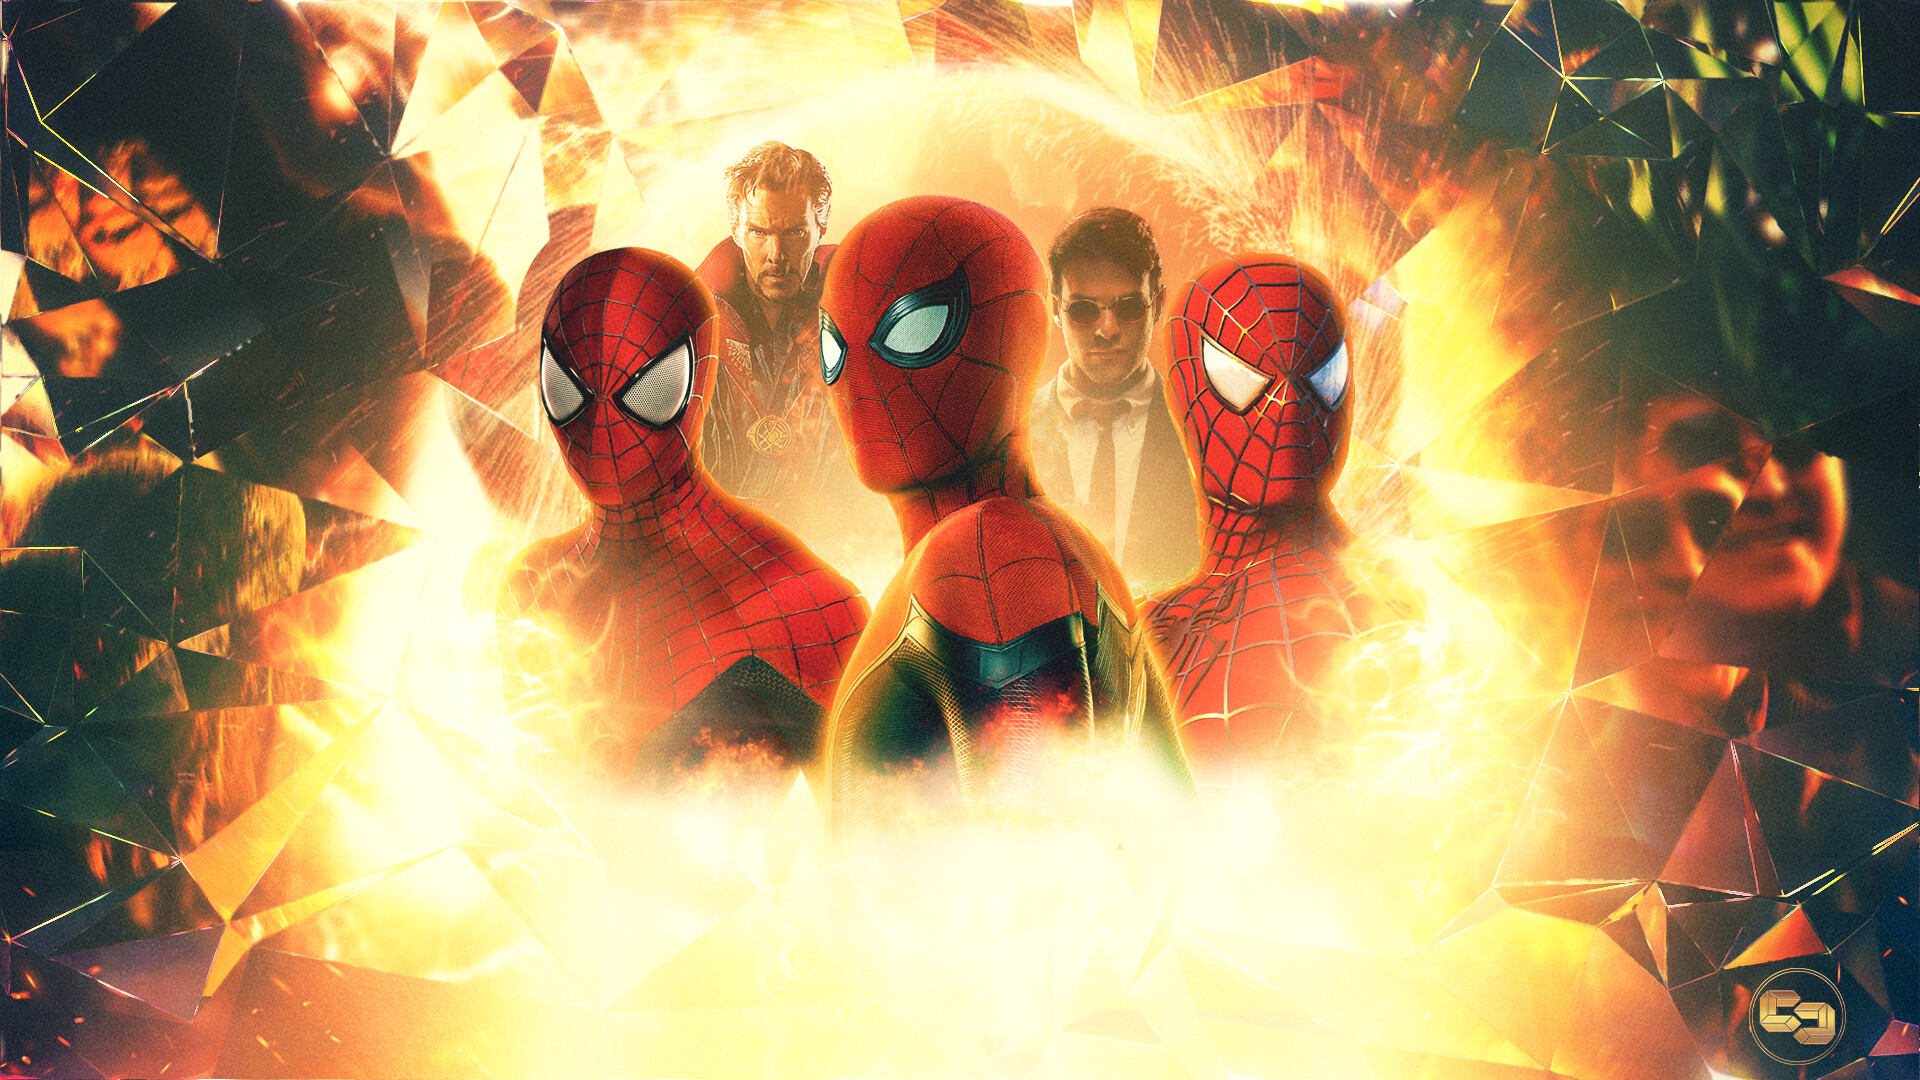 Spider-Man: No Way Home: The sixth-highest-grossing film of all time at the time. 1920x1080 Full HD Background.